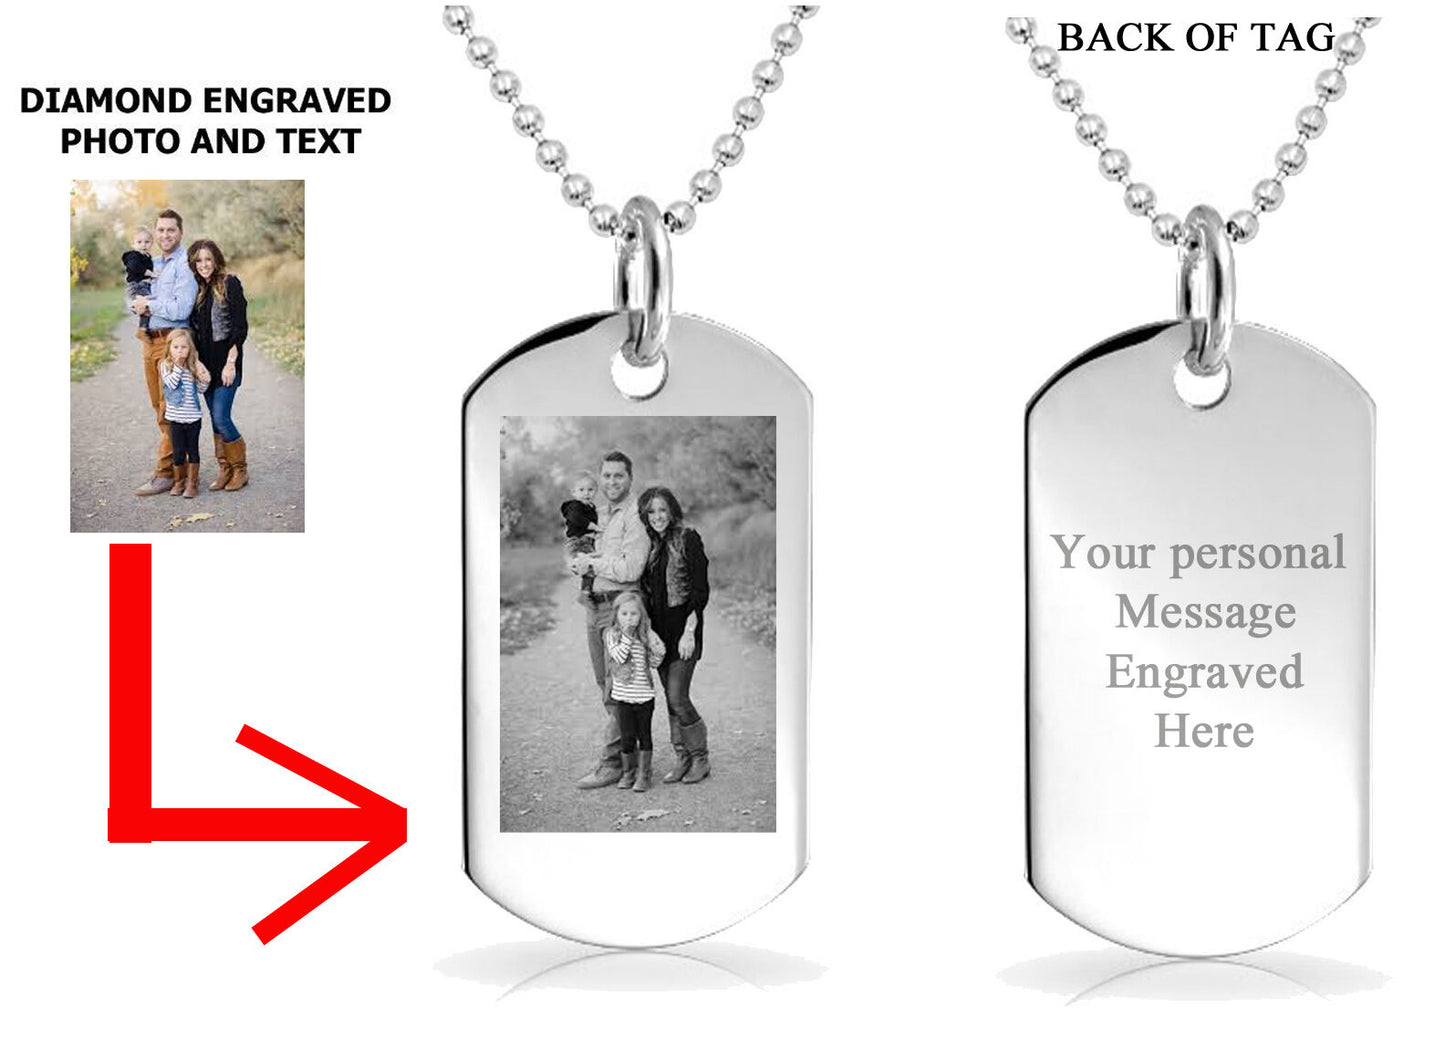 Customized Engraved OR Color Printed Dog Tag Keychain or Necklace - Add Your Text, Logo, or Photo